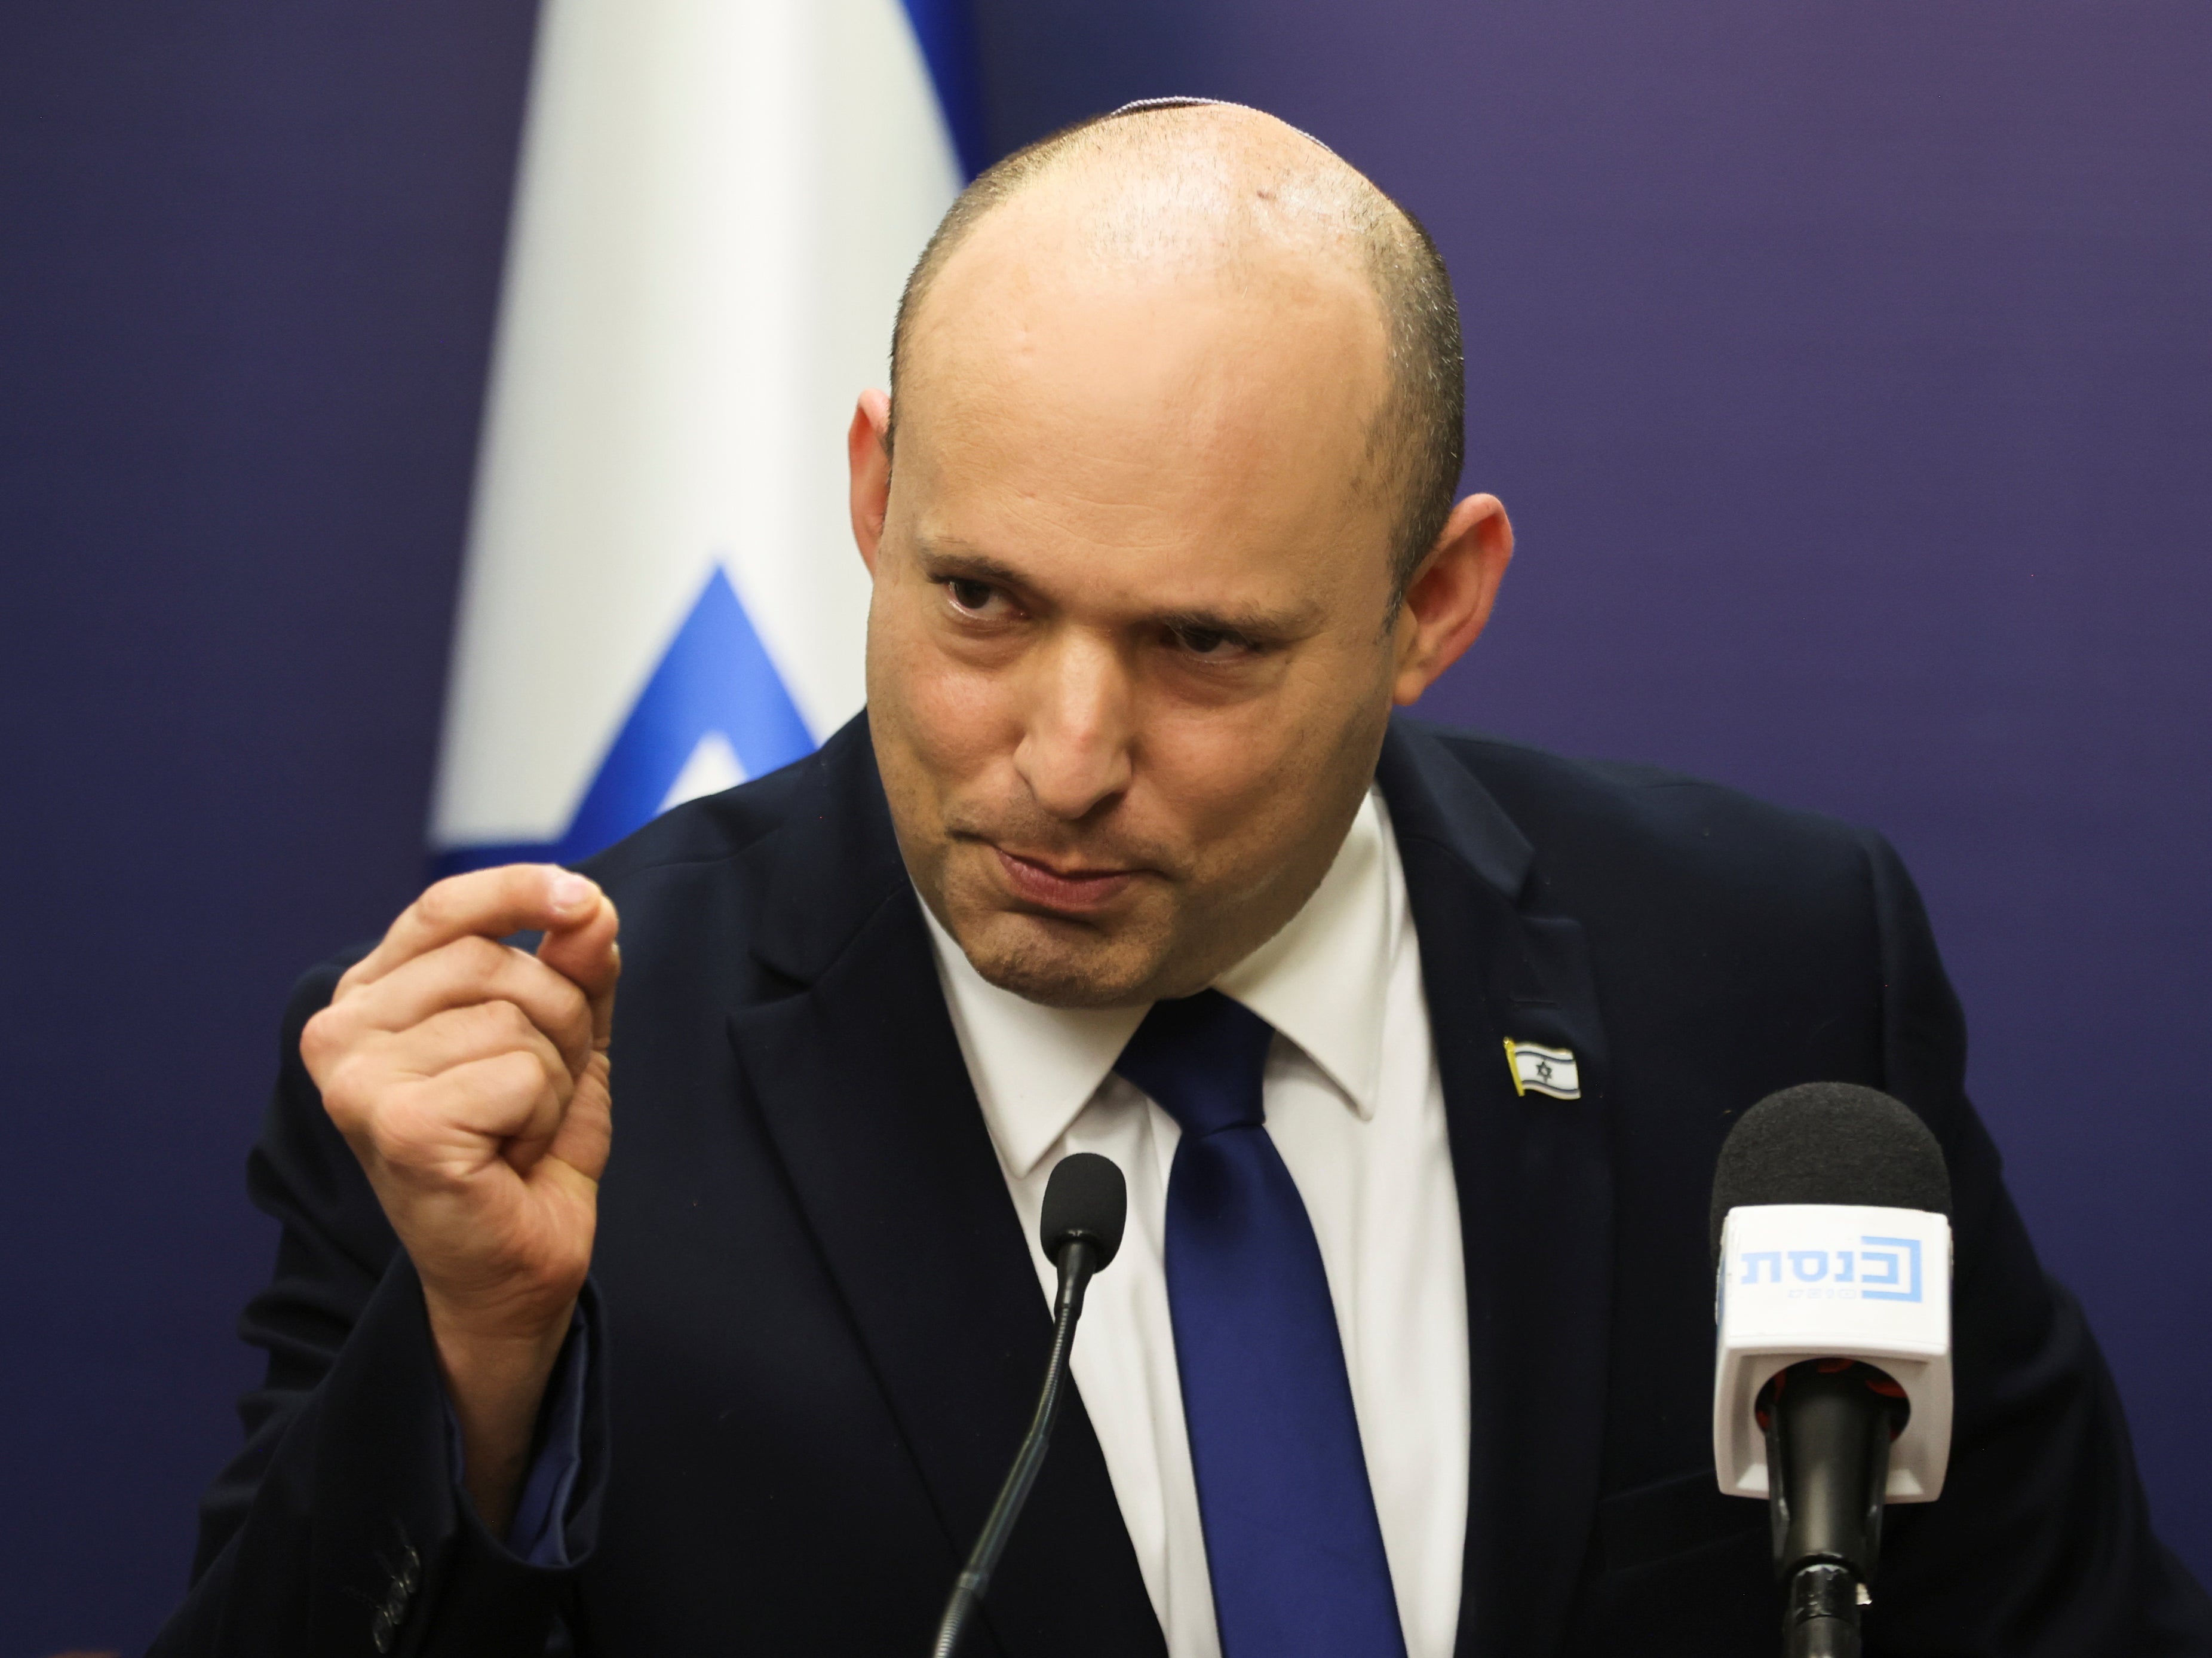 Israeli Prime Minister Bennett gestures as he speaks during his party faction meeting at Israel’s parliament in Jerusalem